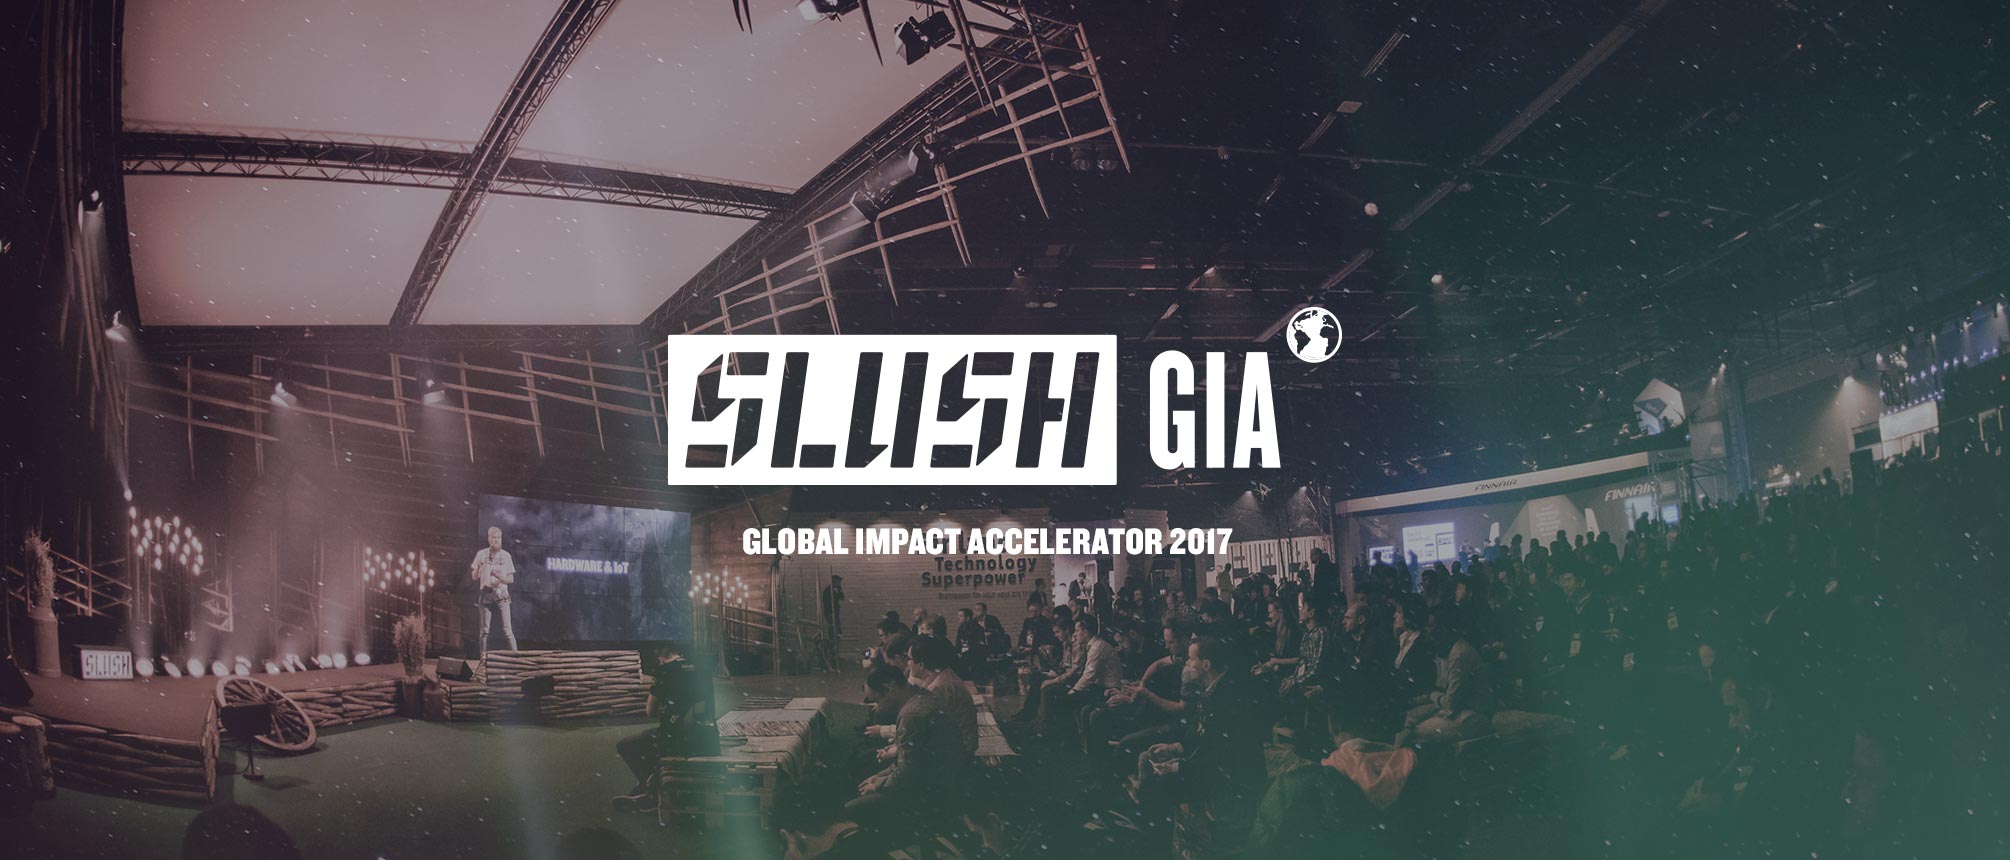 Slush 2017: An opportunity for India’s startups to accelerate on a global stage